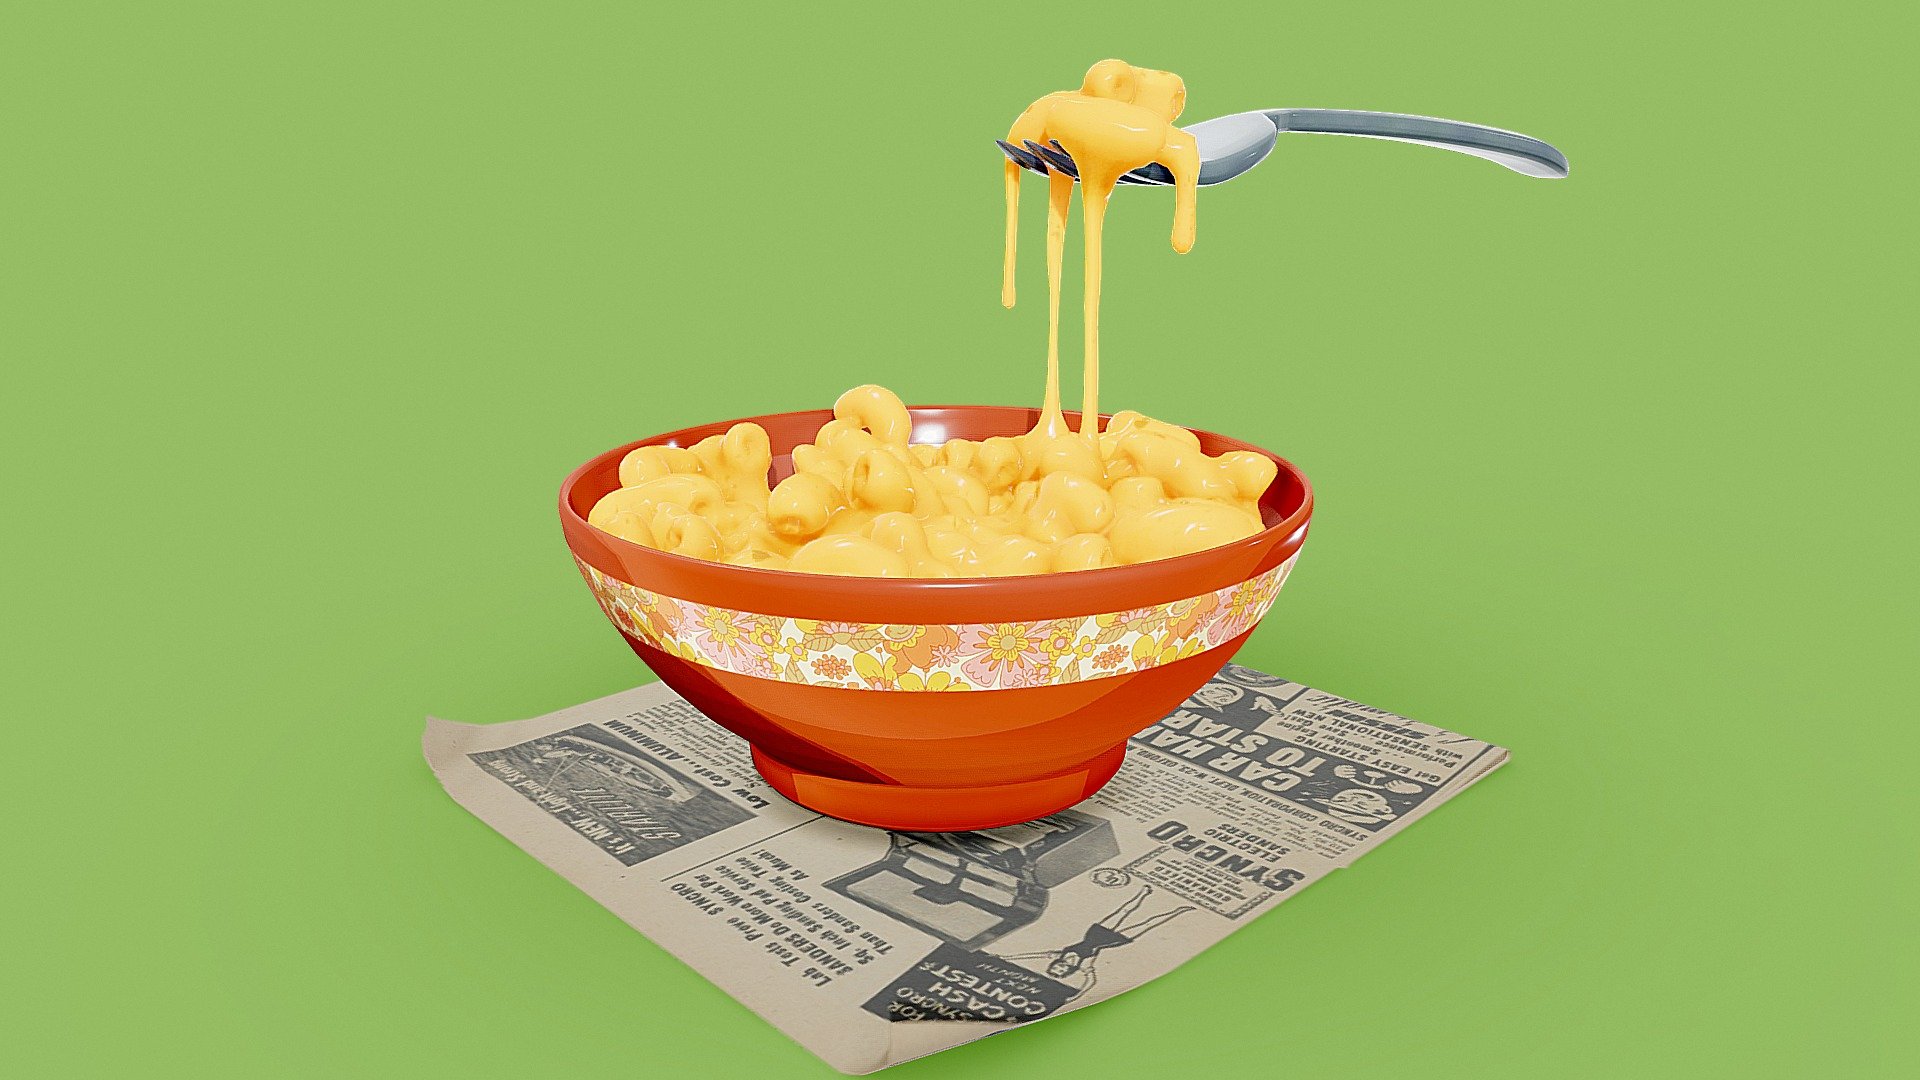 Mac and cheese in a bowl - Macncheese - 3D model by naira001 3d model